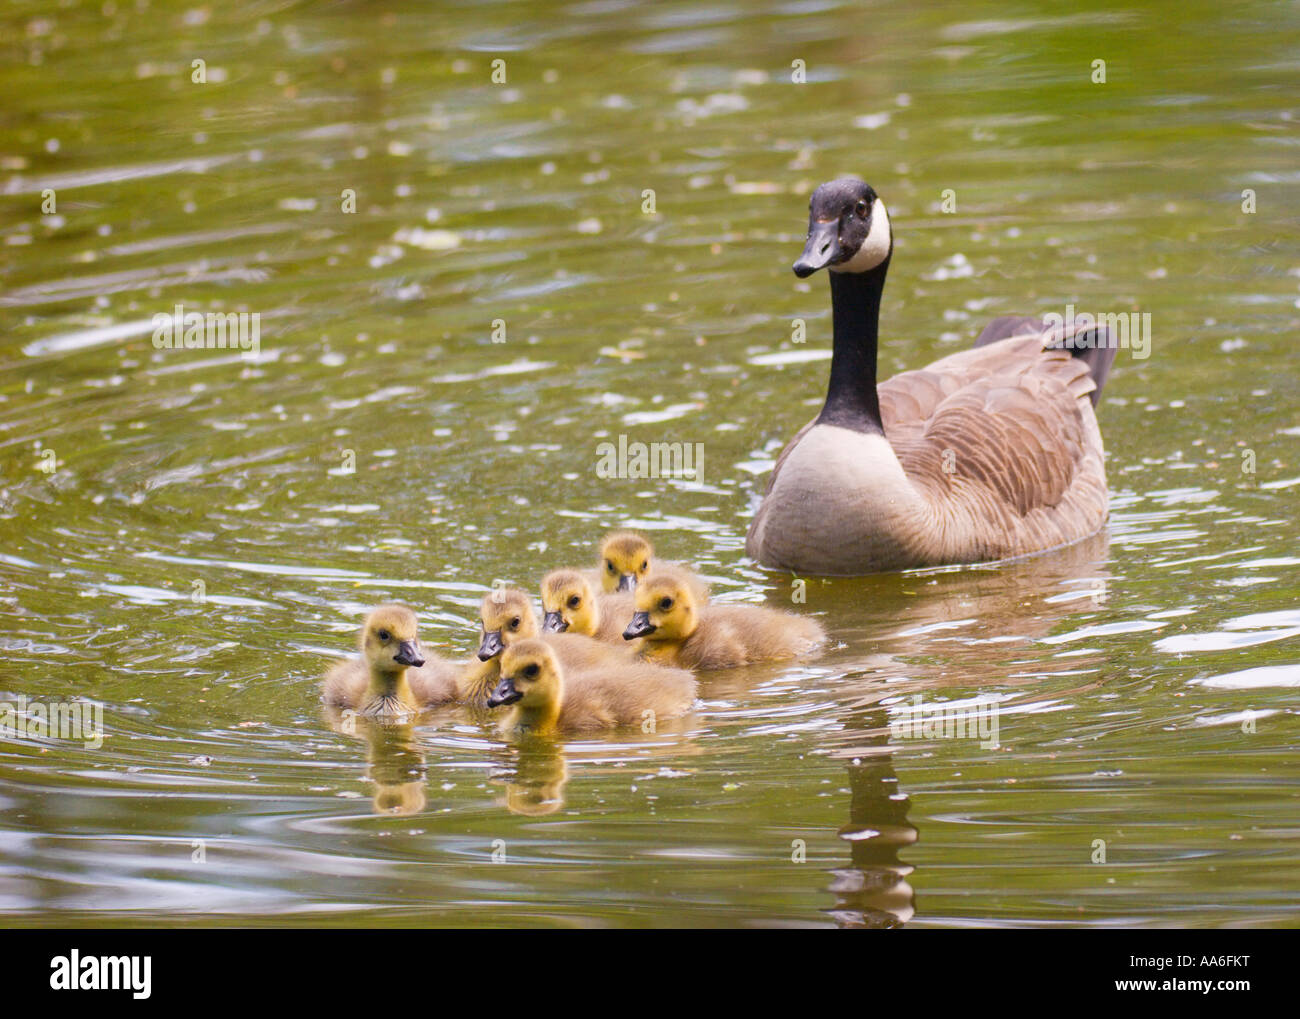 A Canada goose (Branta canadensis) swimming on a pond with its goslings Stock Photo